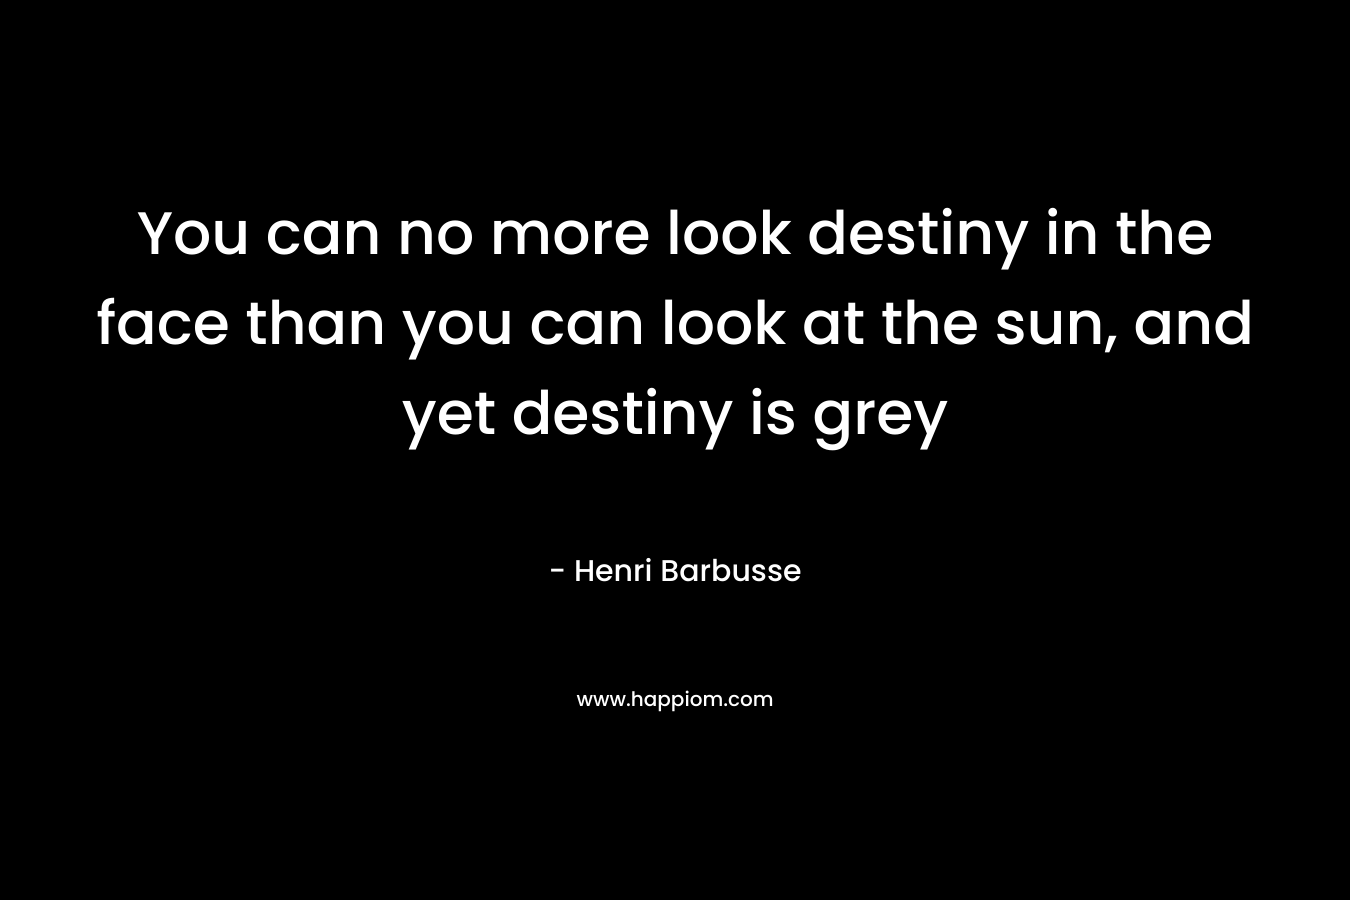 You can no more look destiny in the face than you can look at the sun, and yet destiny is grey